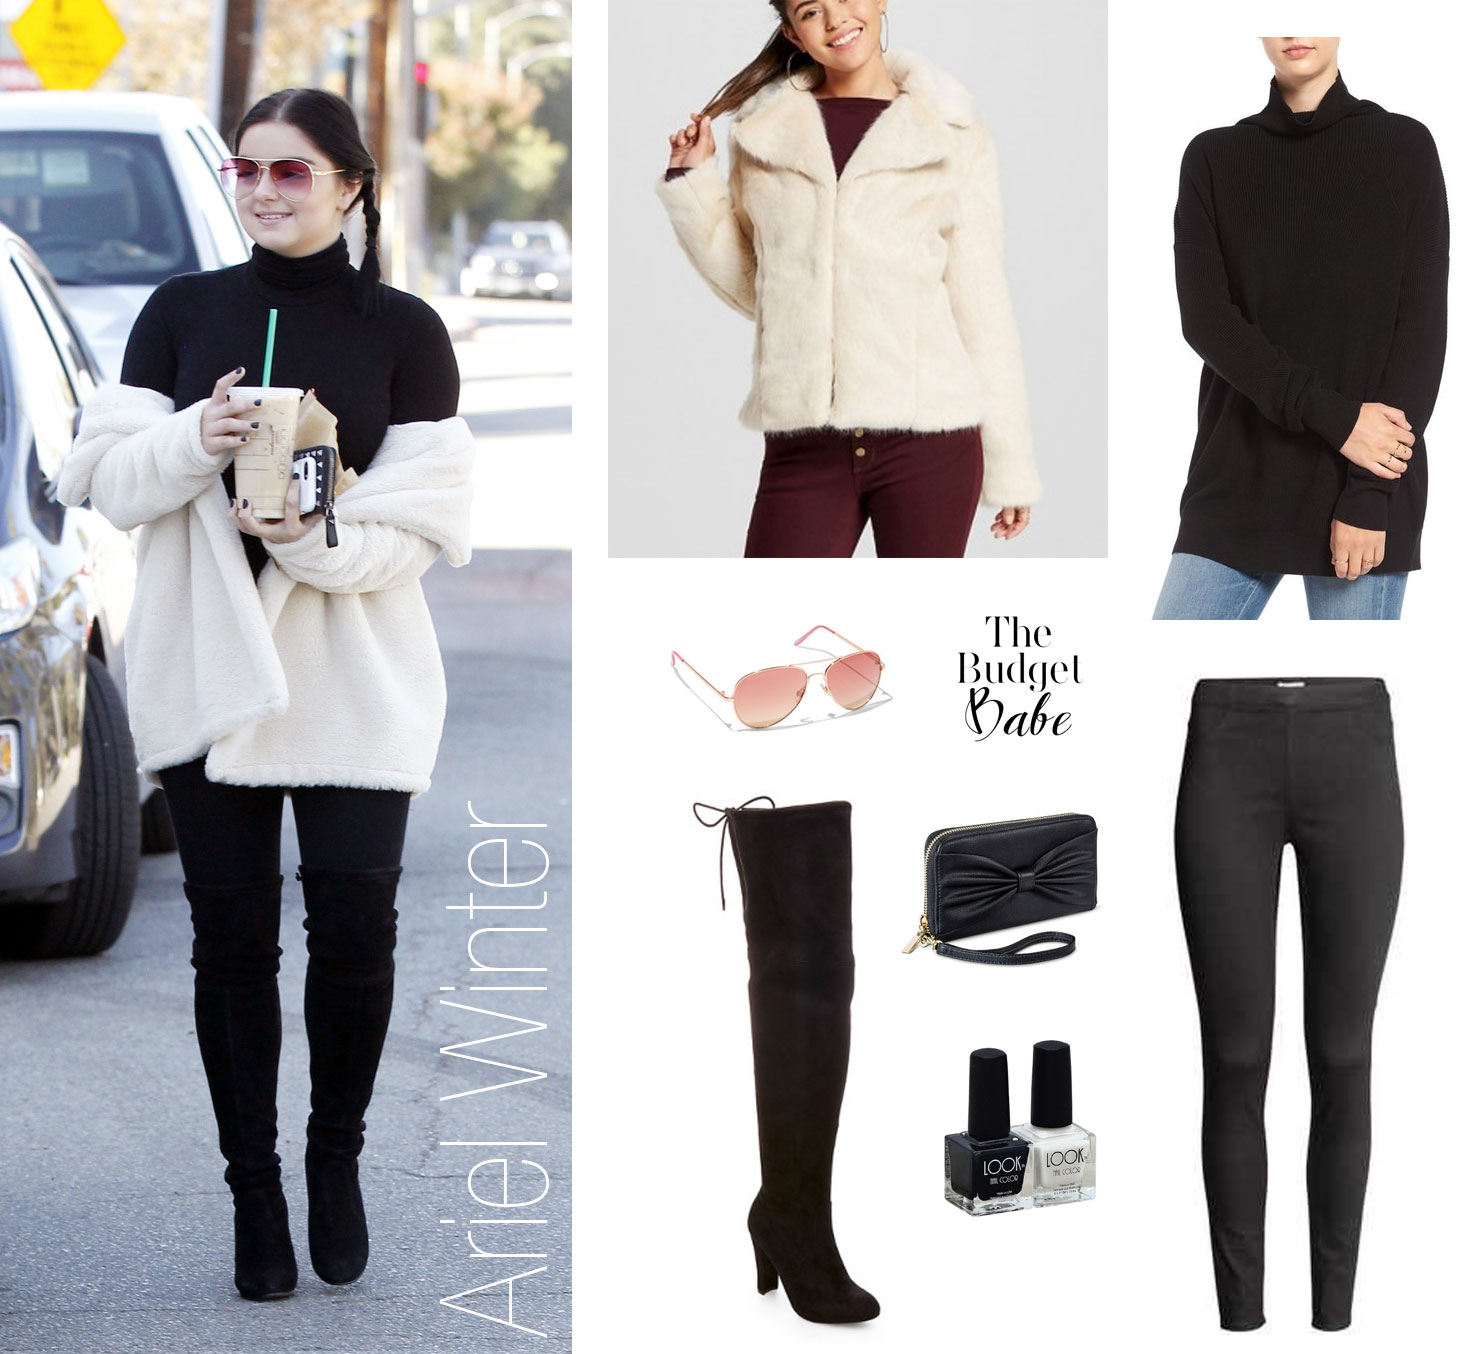 Ariel Winter wears an all black ensemble with a faux fur coat in ivory and over the knee boots.